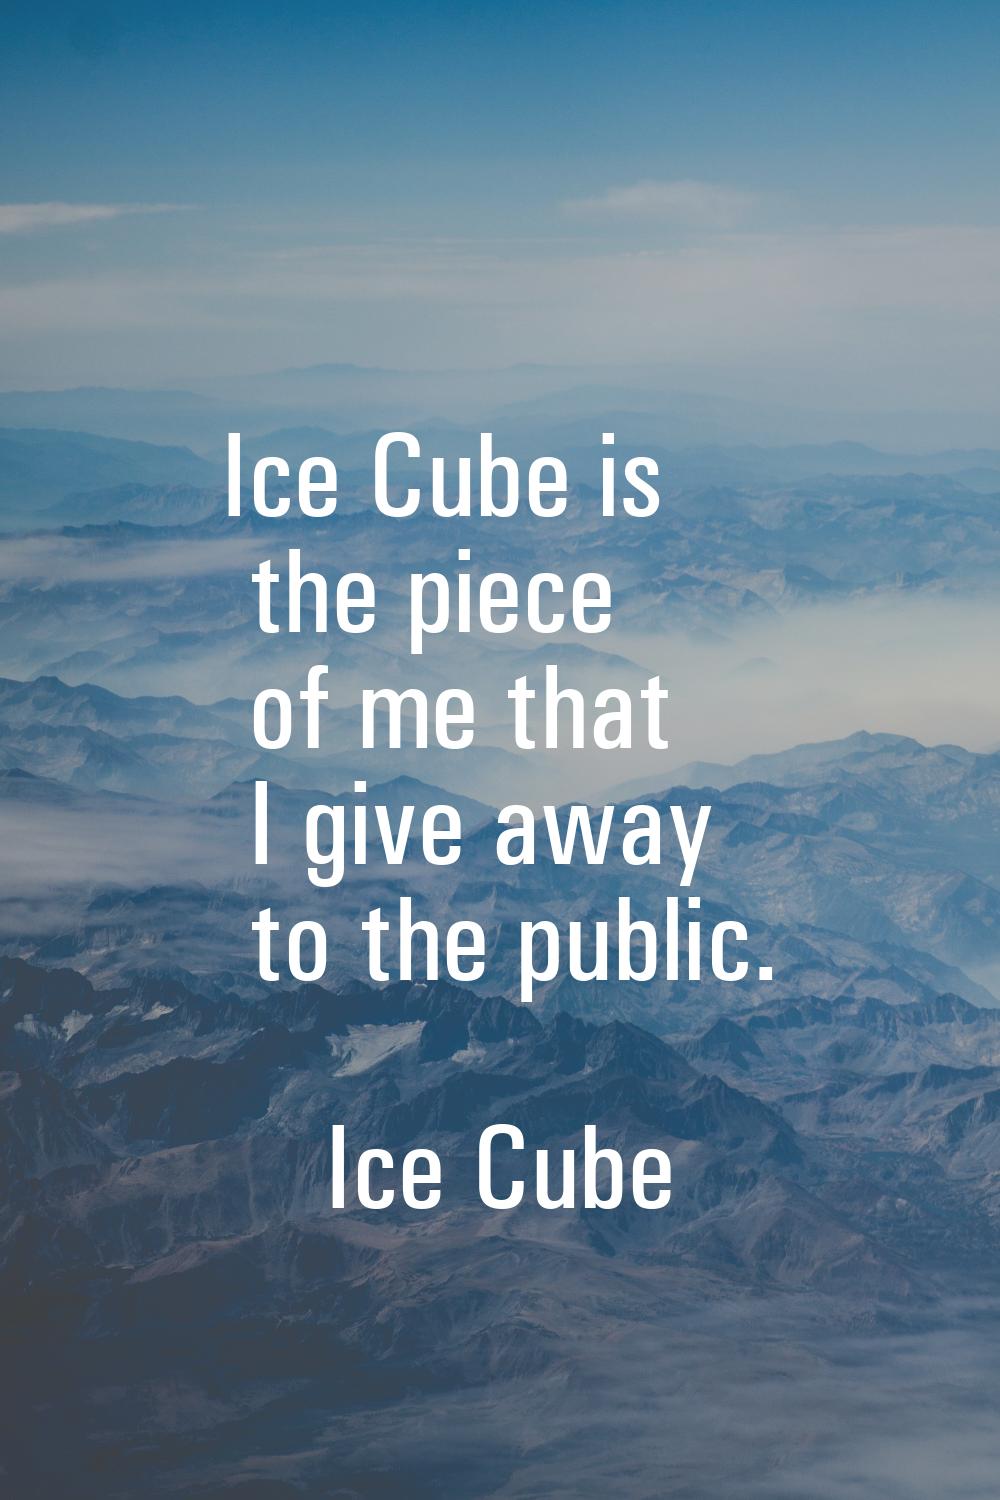 Ice Cube is the piece of me that I give away to the public.